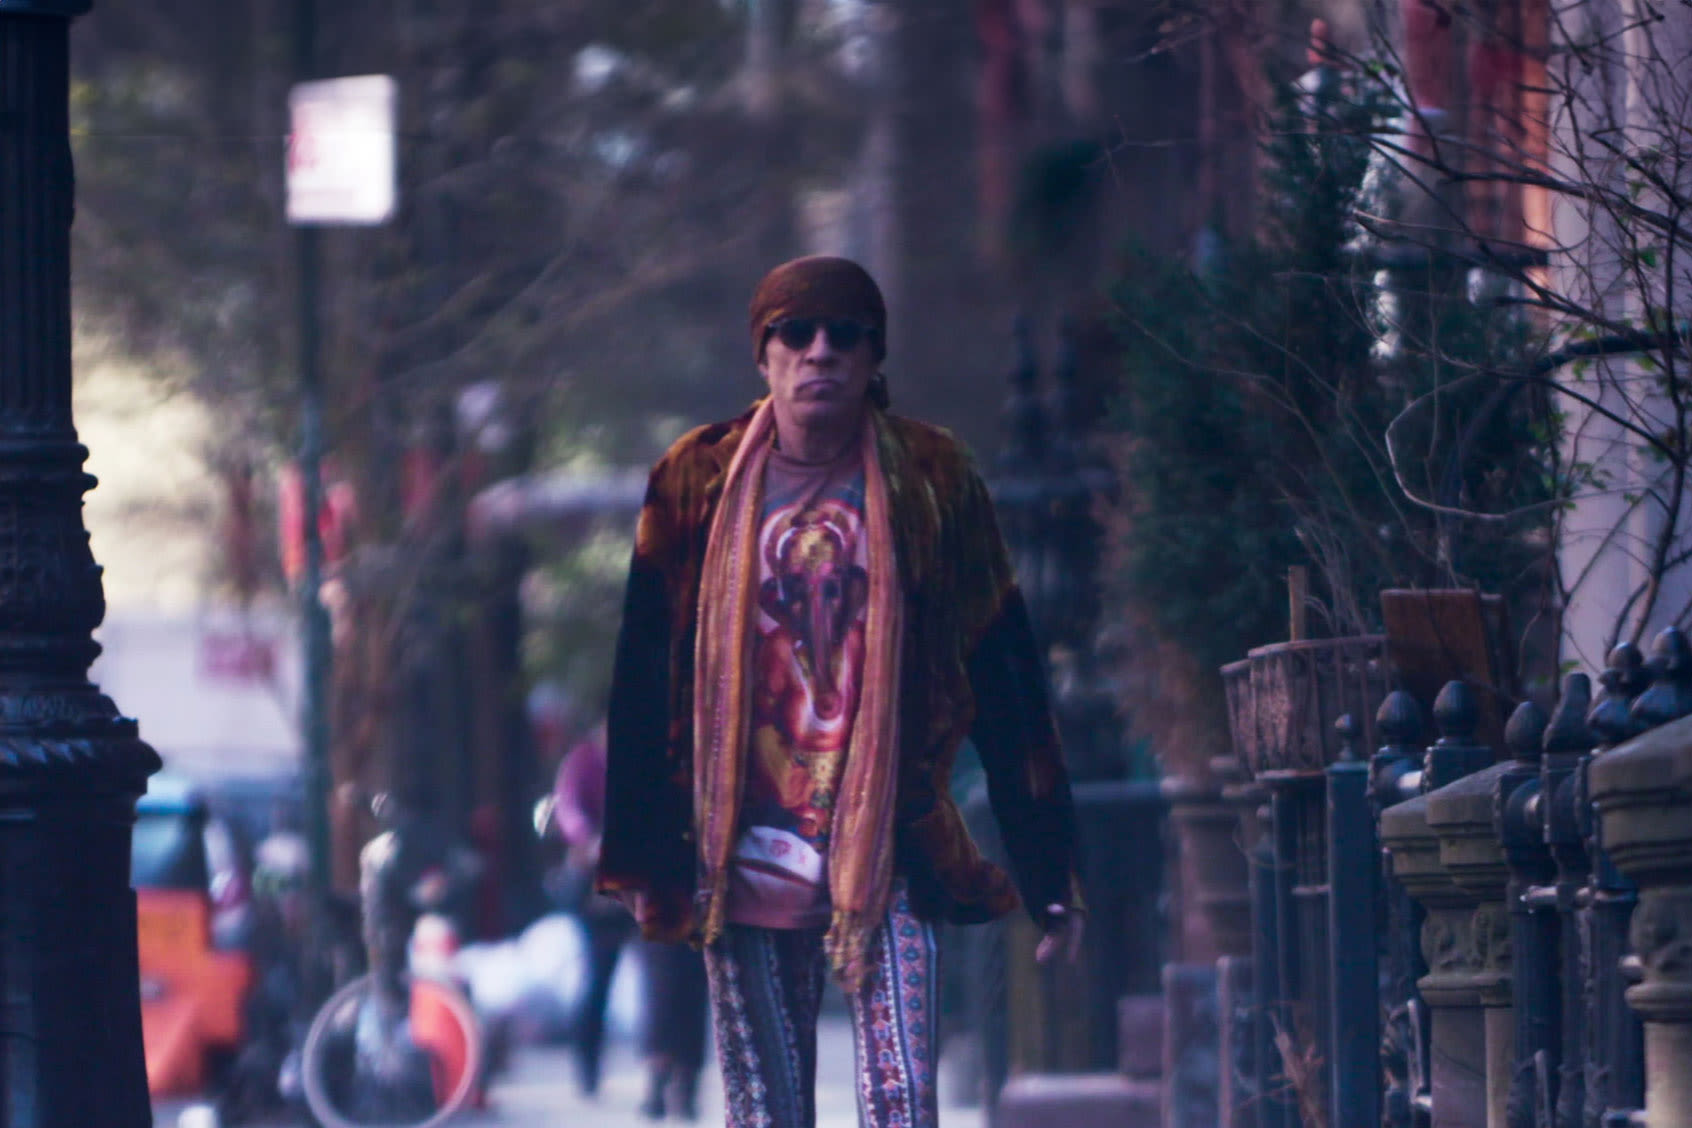 "He politicized rock and roll": Five fascinating facts from HBO's "Stevie Van Zandt: Disciple"